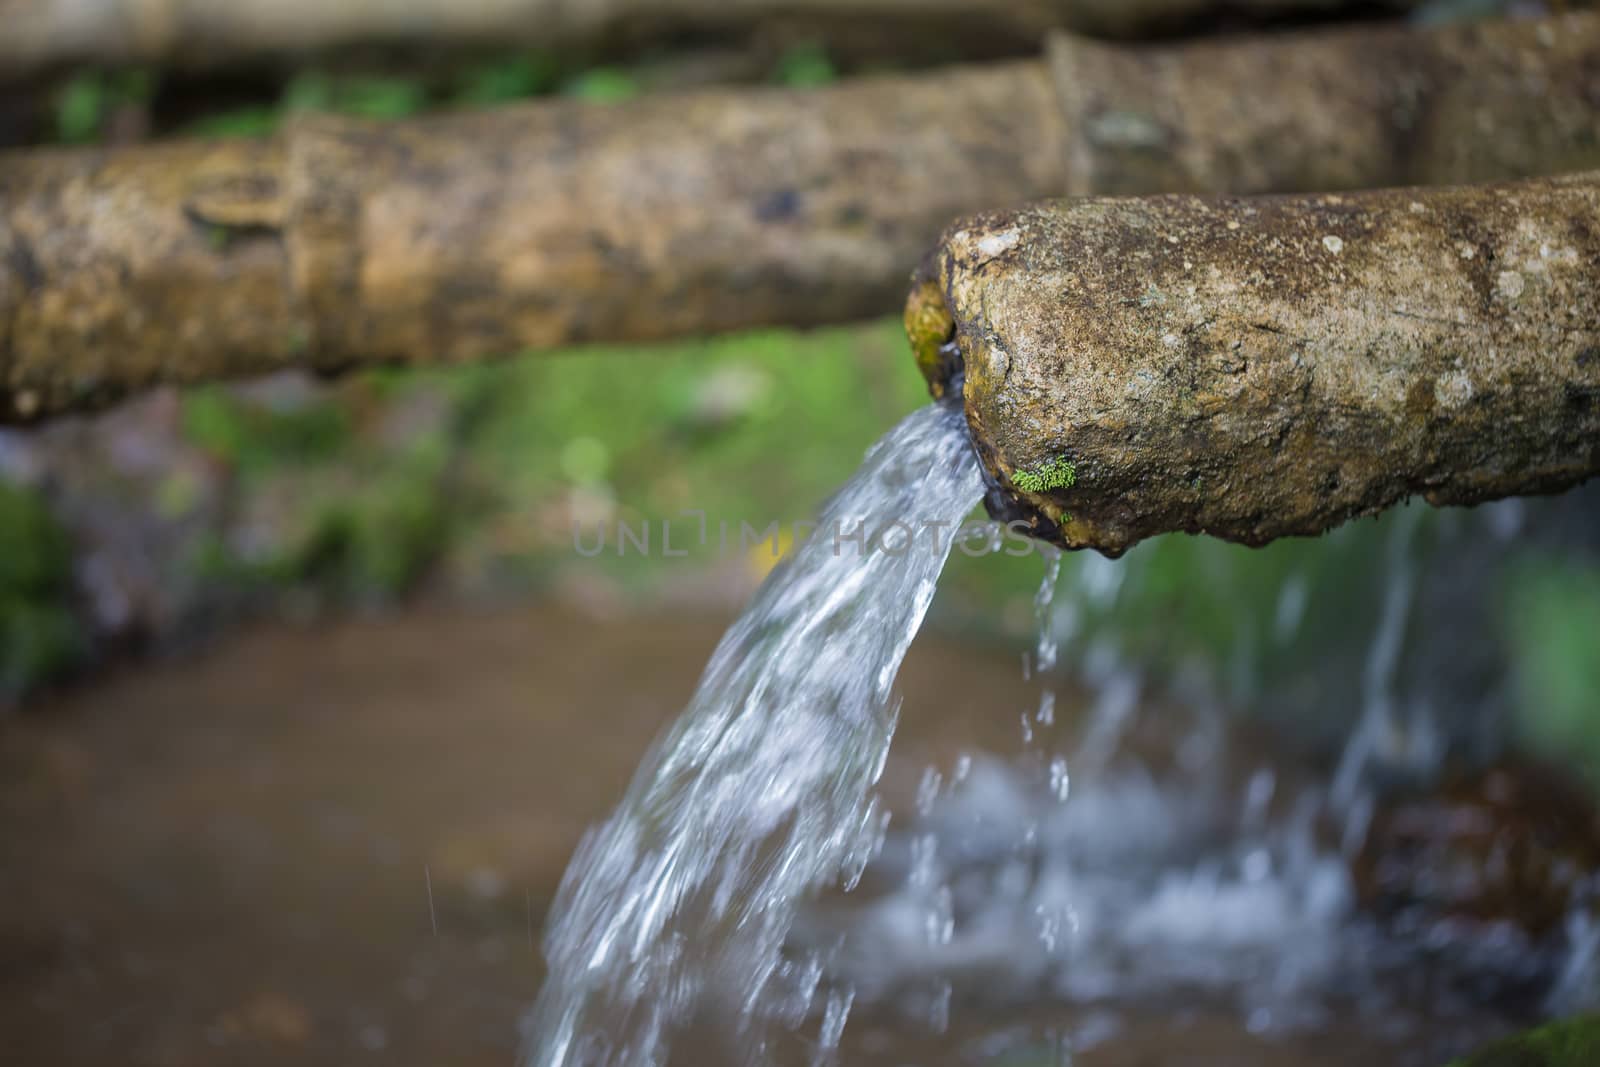 Natural water is flowing from bamboo pipe for agriculture.